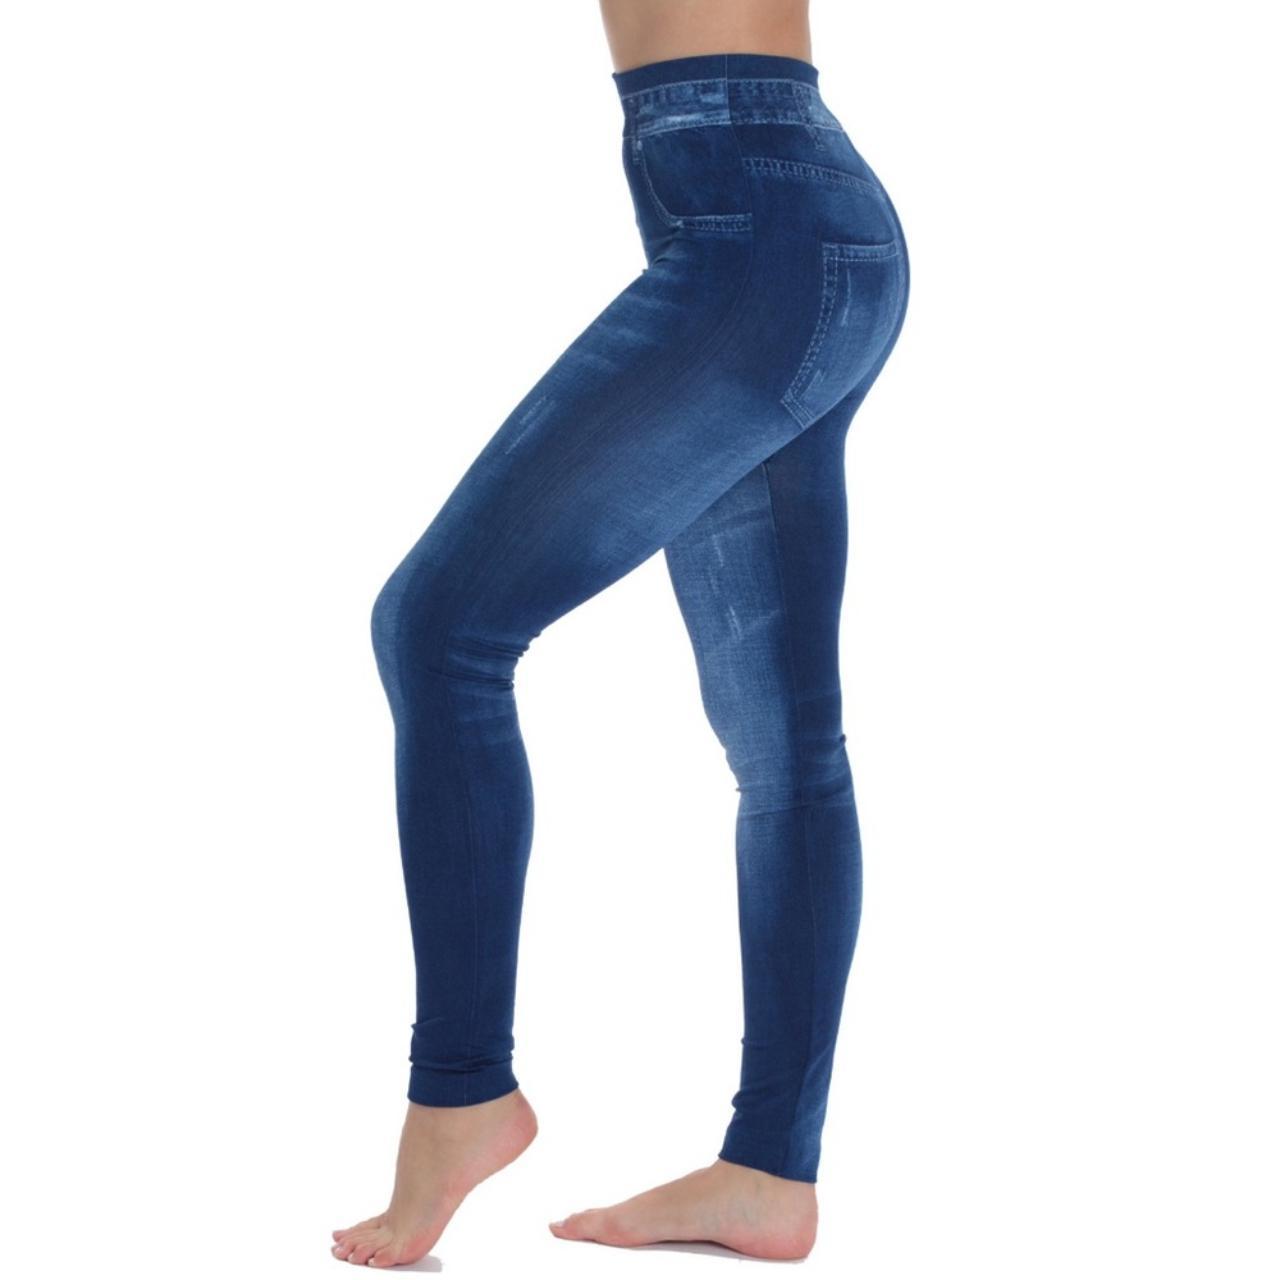 Product Image 1 - Miss juli s/m
Love that jeans